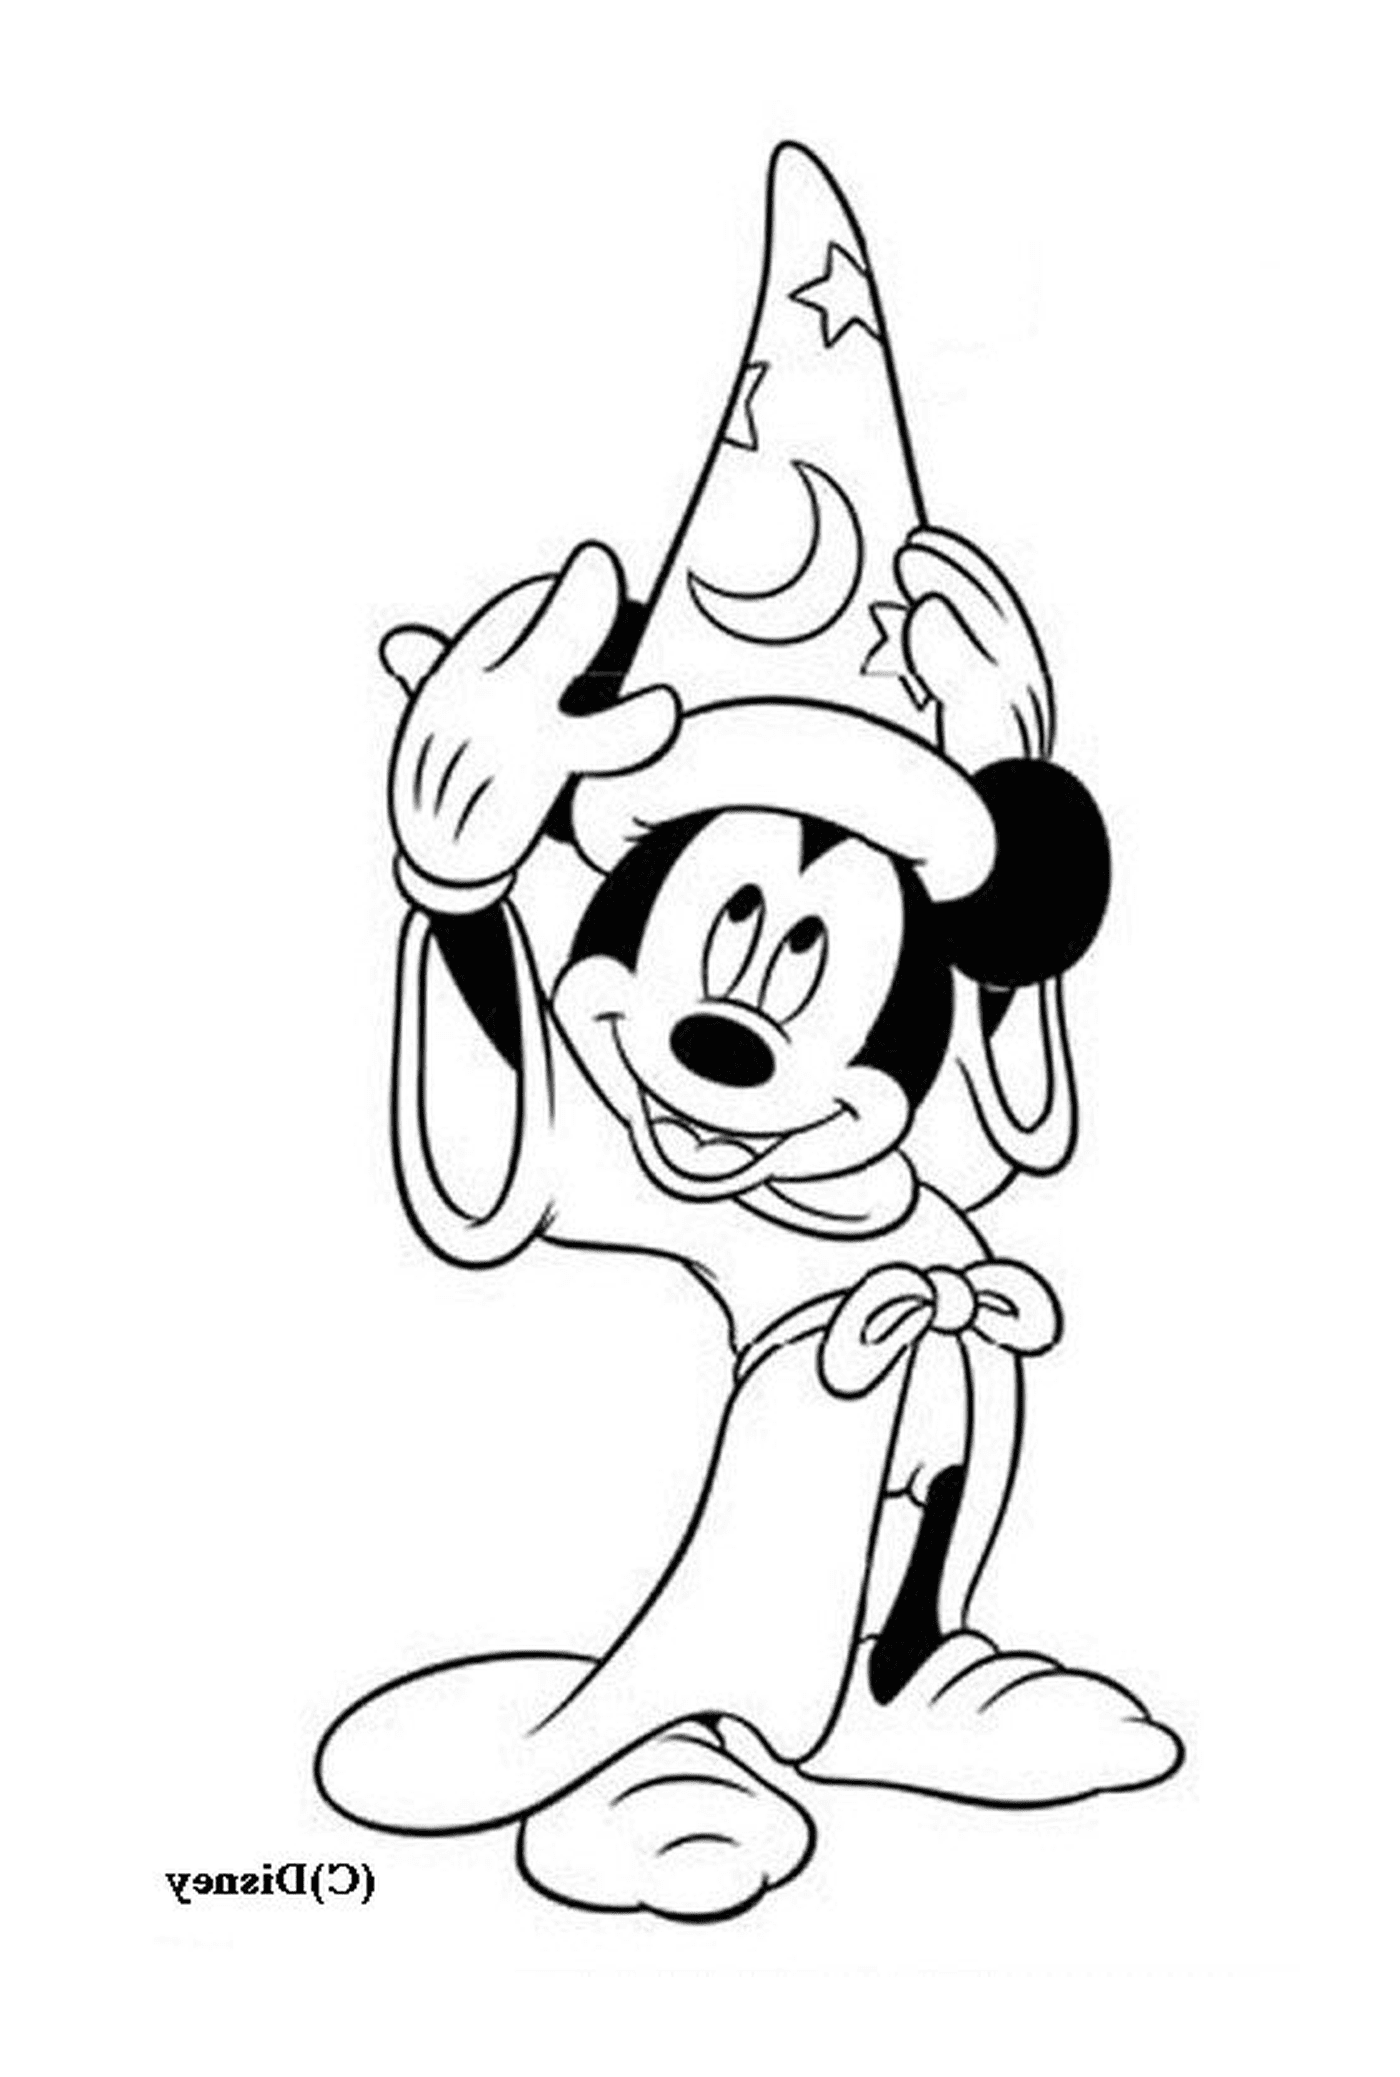  Mickey Mouse holds a hat in her hand 